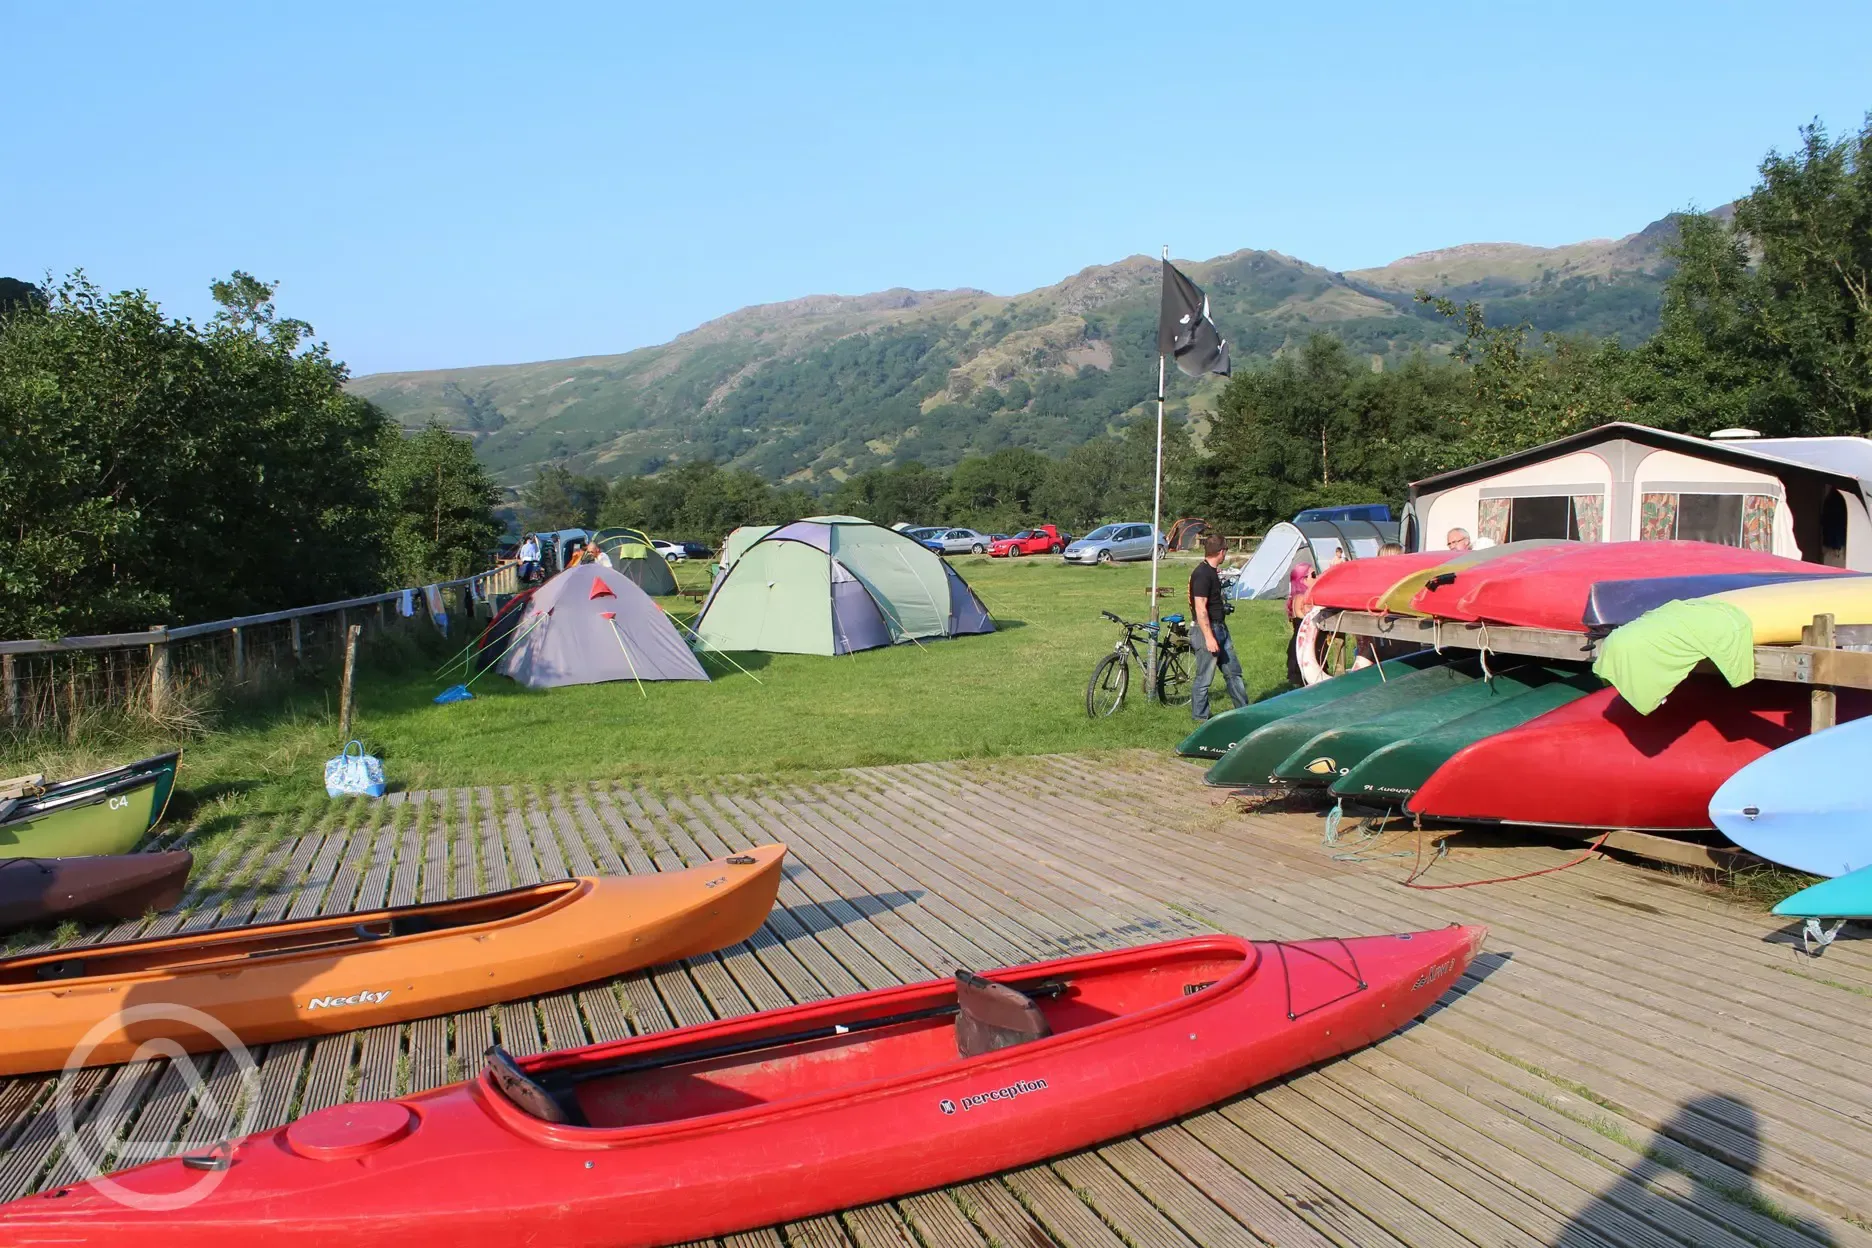 Kayak and canoe hire is available at the campsite.